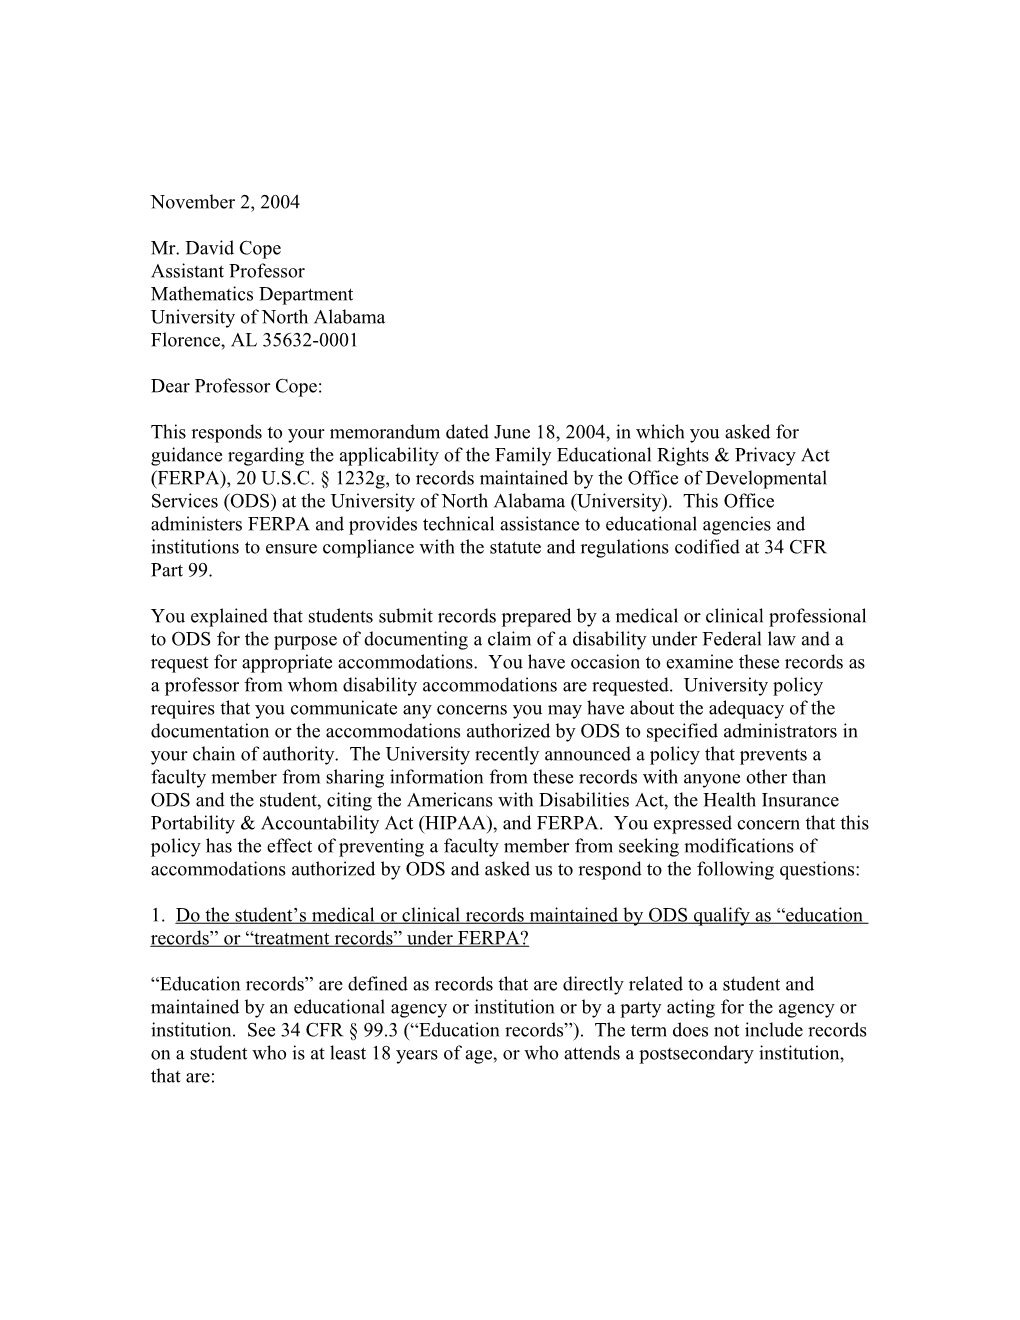 Letter to University of North Alabama Re: Disability Office Records (11/2/04) (MS Word)